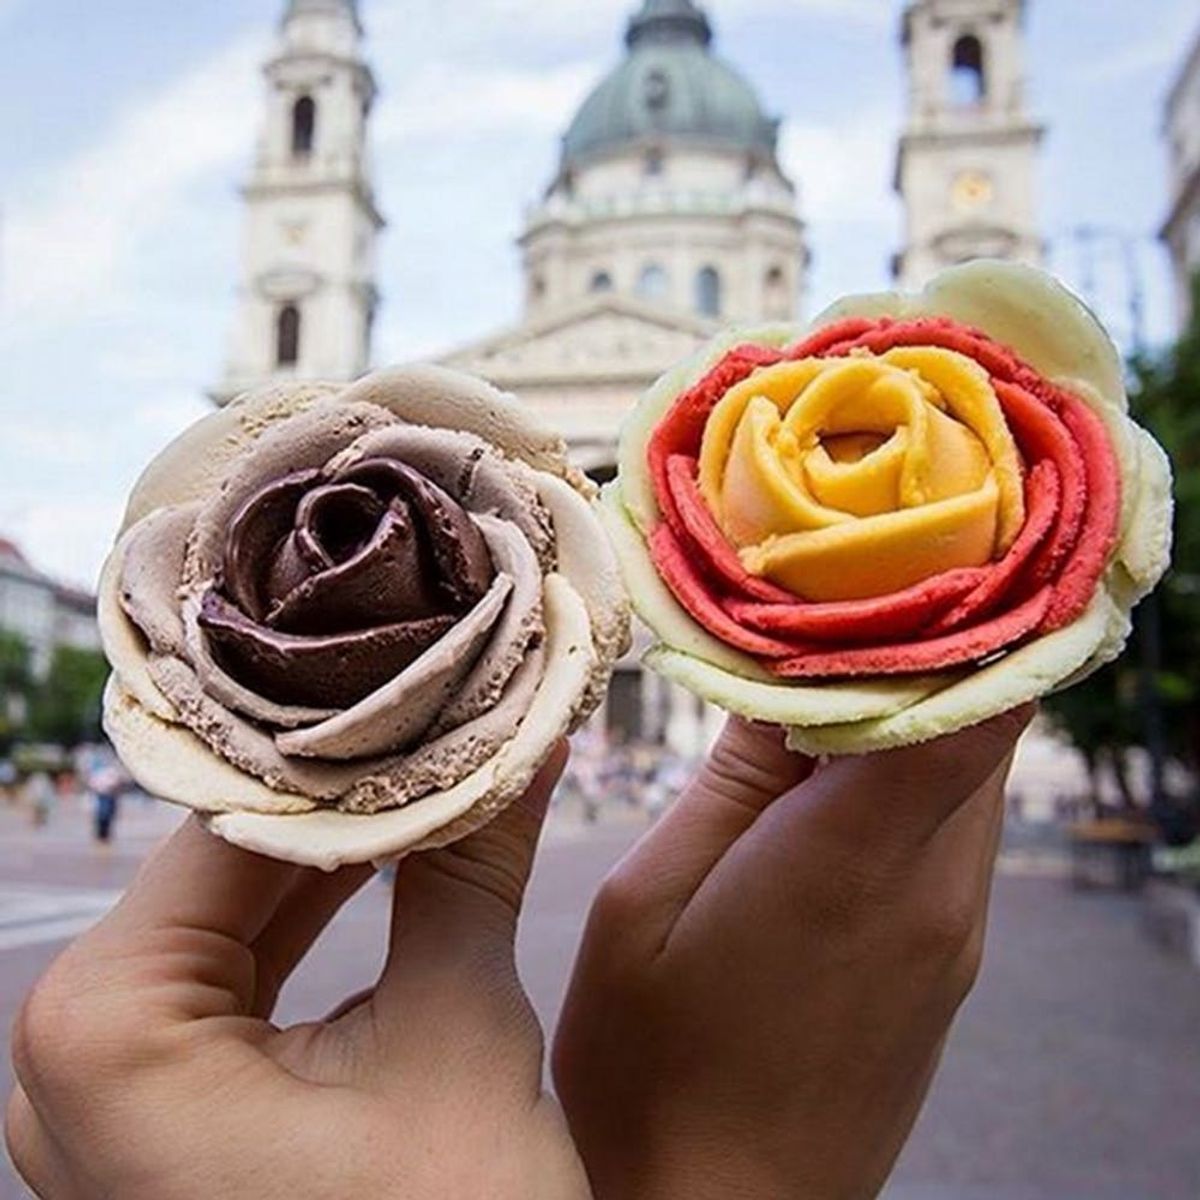 Gelato Flowers Are Here to Put Your Basic Ice Cream Cone to Shame